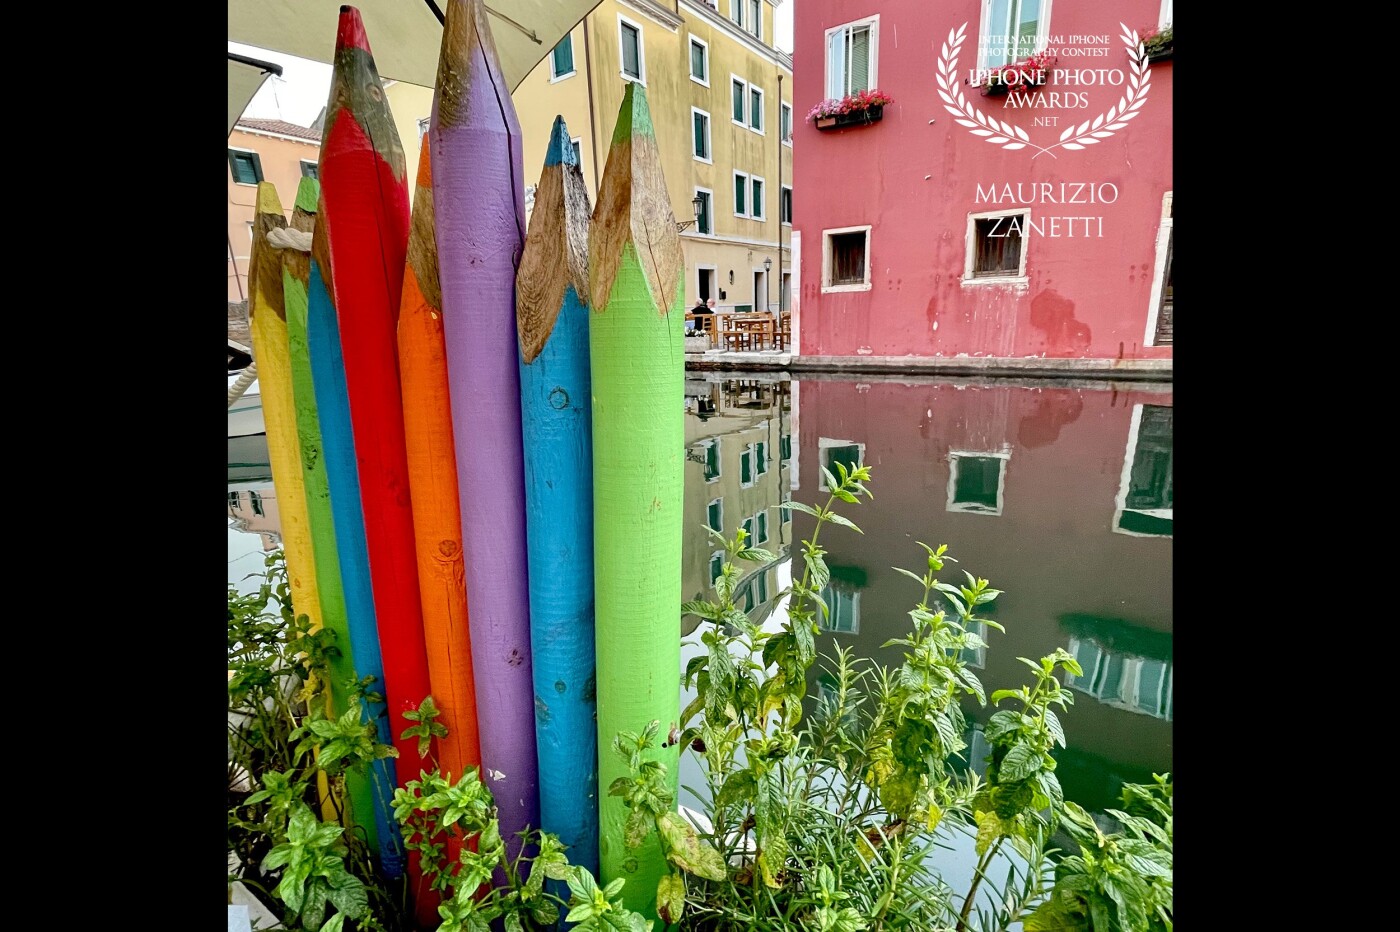 Chioggia, known and admired as "the little Venice", reserves continuous surprises among its streets and canals. Even the parapet between the tables of a "bacaro" and the canal gives joy with its rainbow of colors.